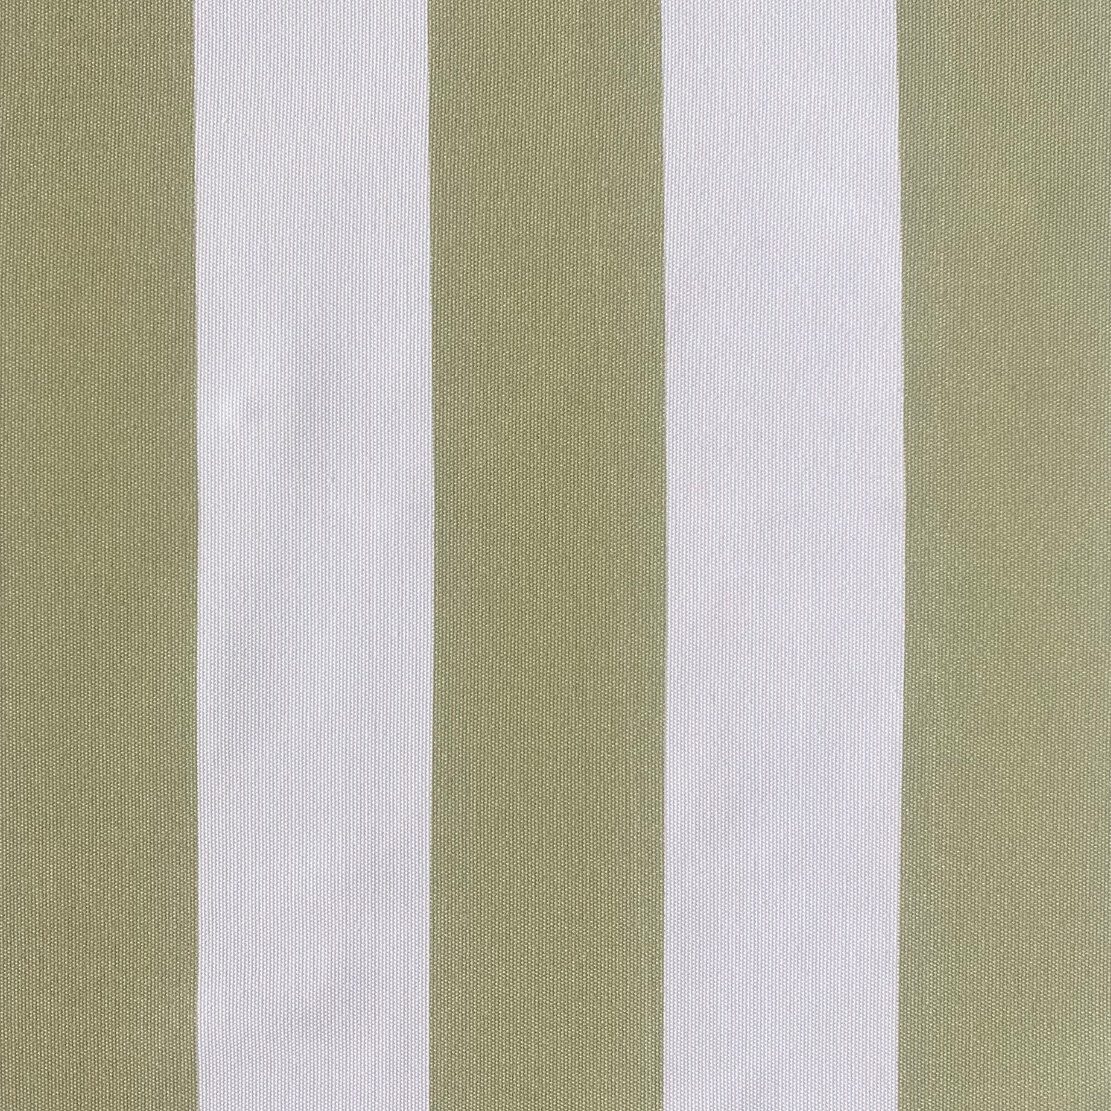 Sage and White Stripe outdoor fabric.